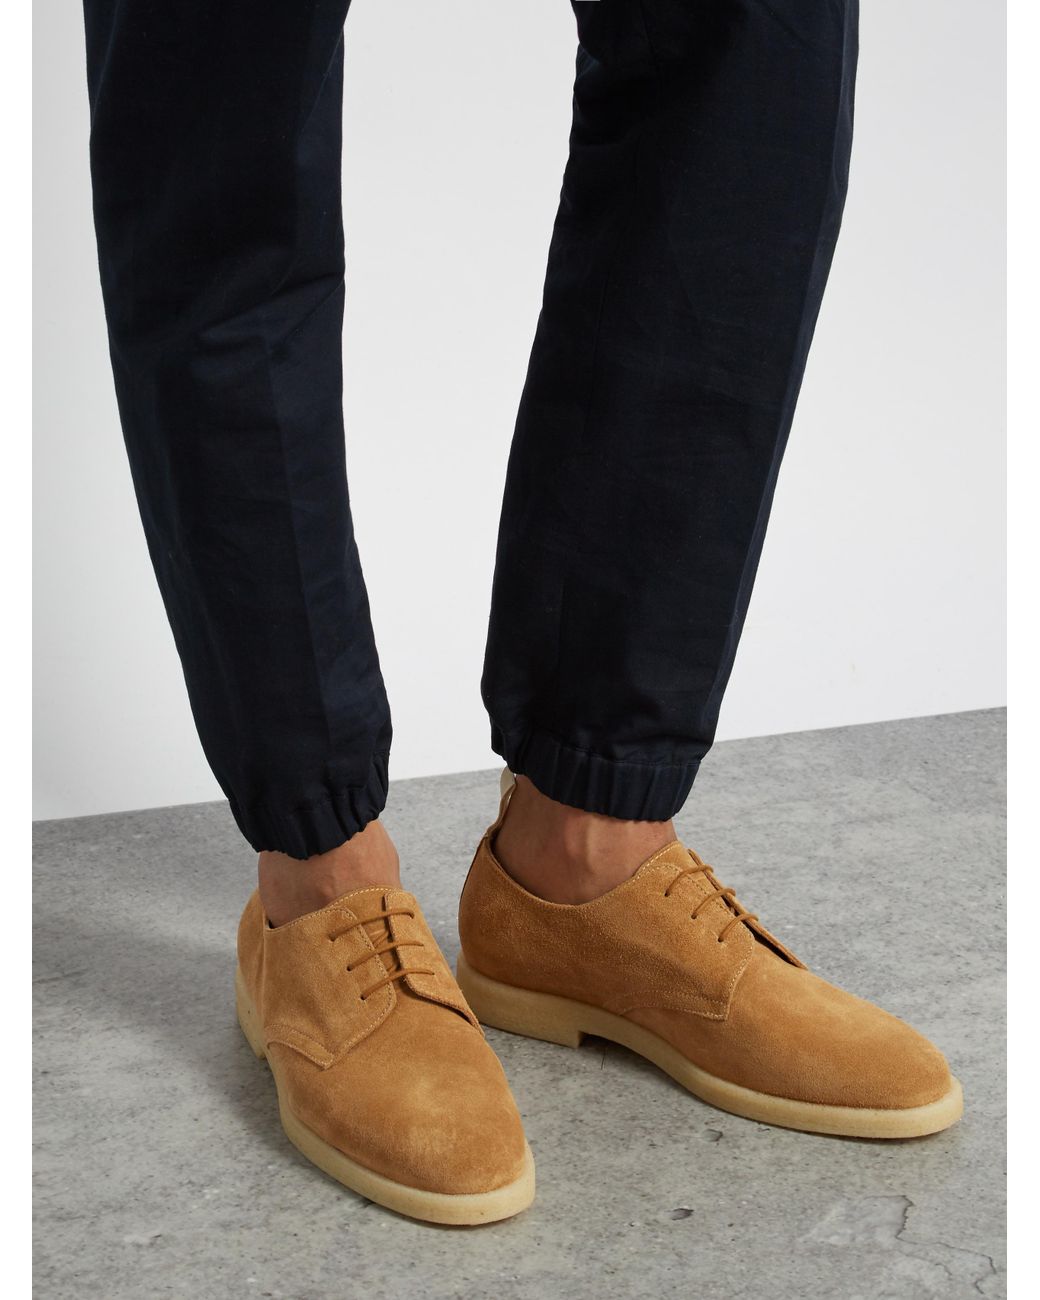 Common Projects Cadet Suede Derby Shoes for Men | Lyst